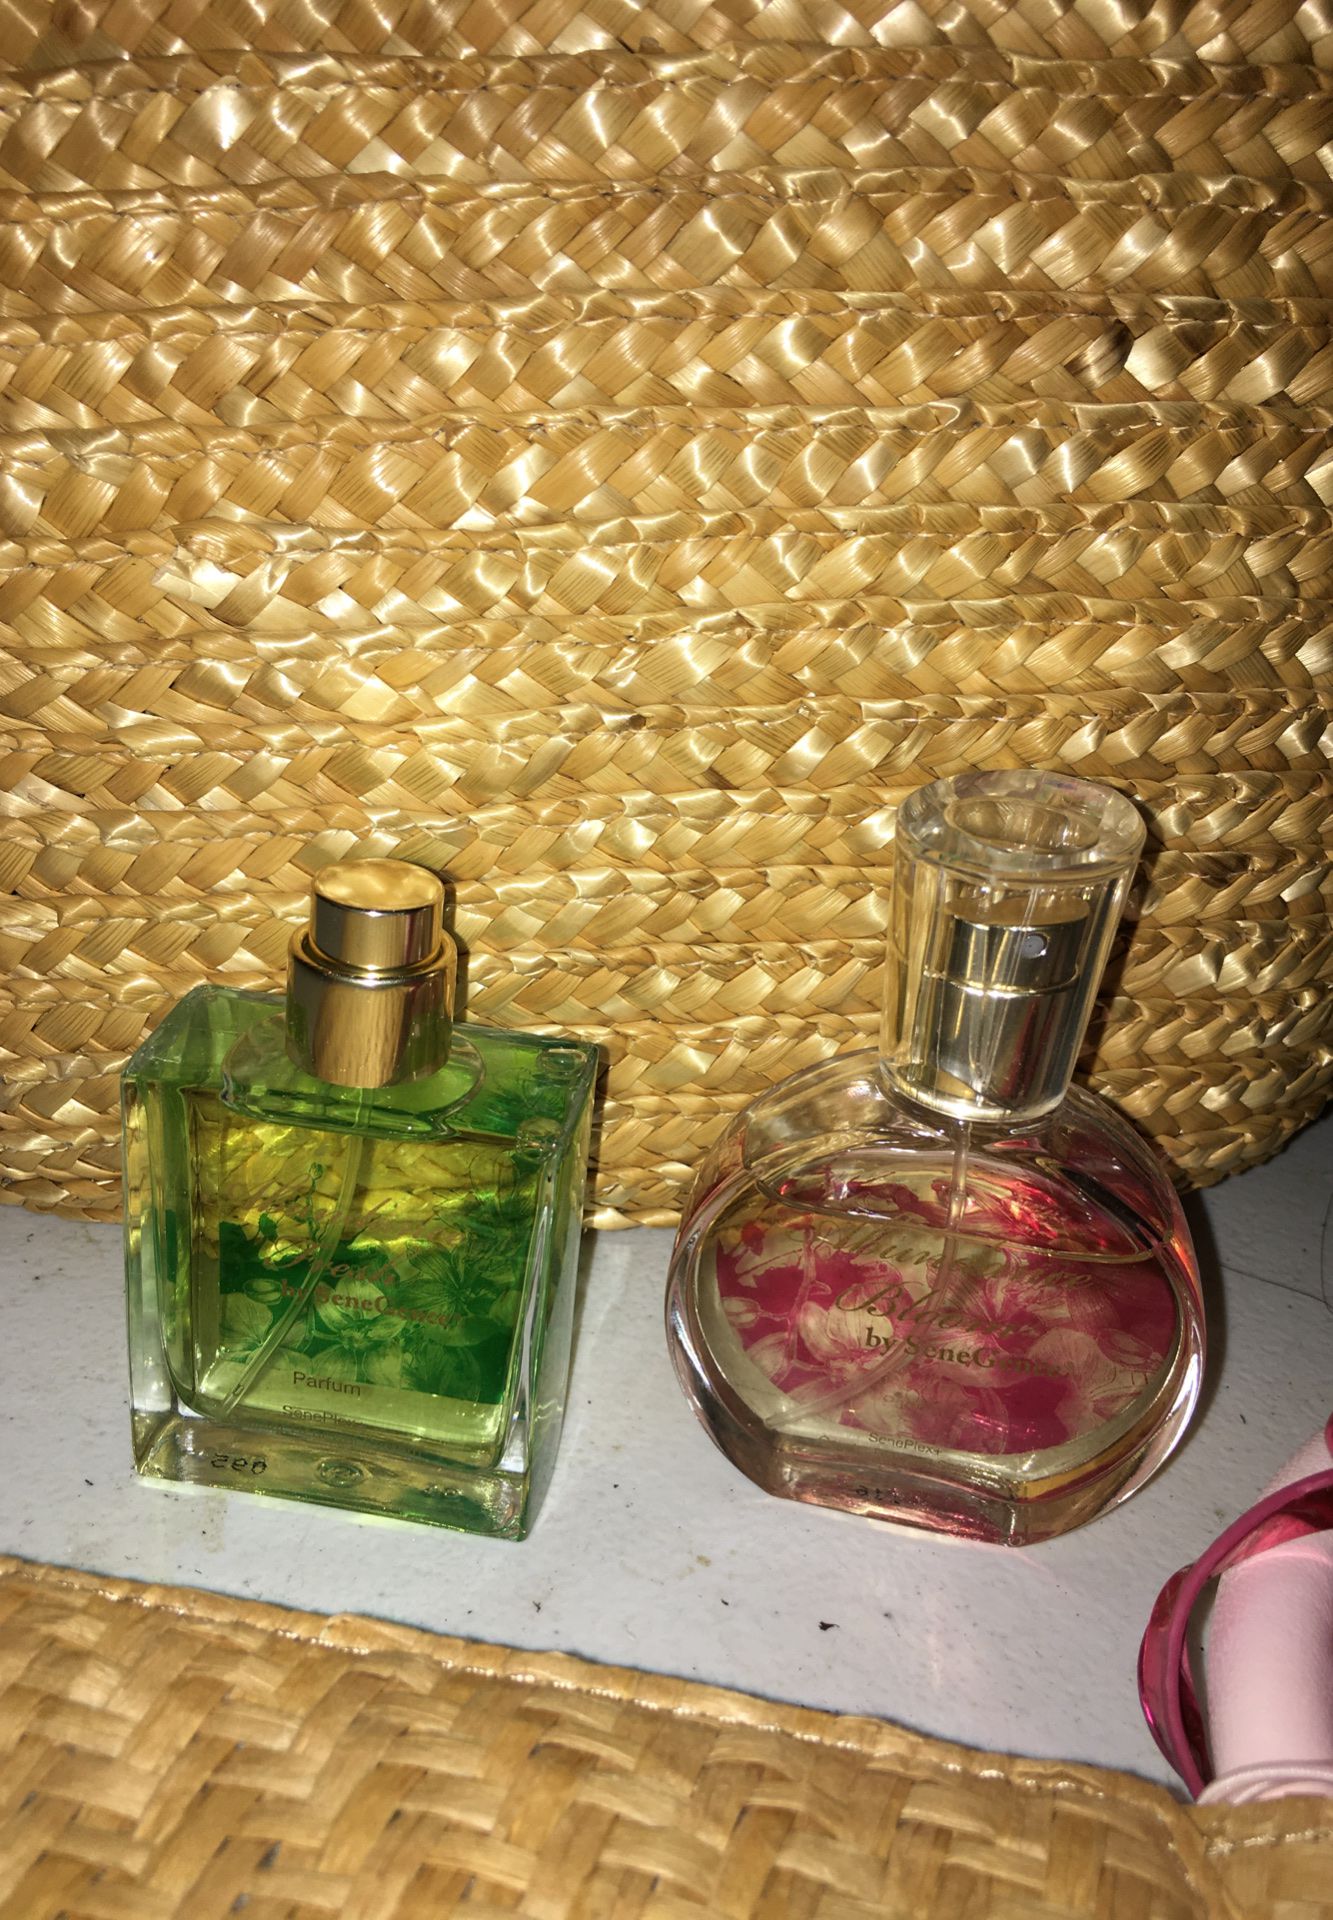 Two small new perfumes